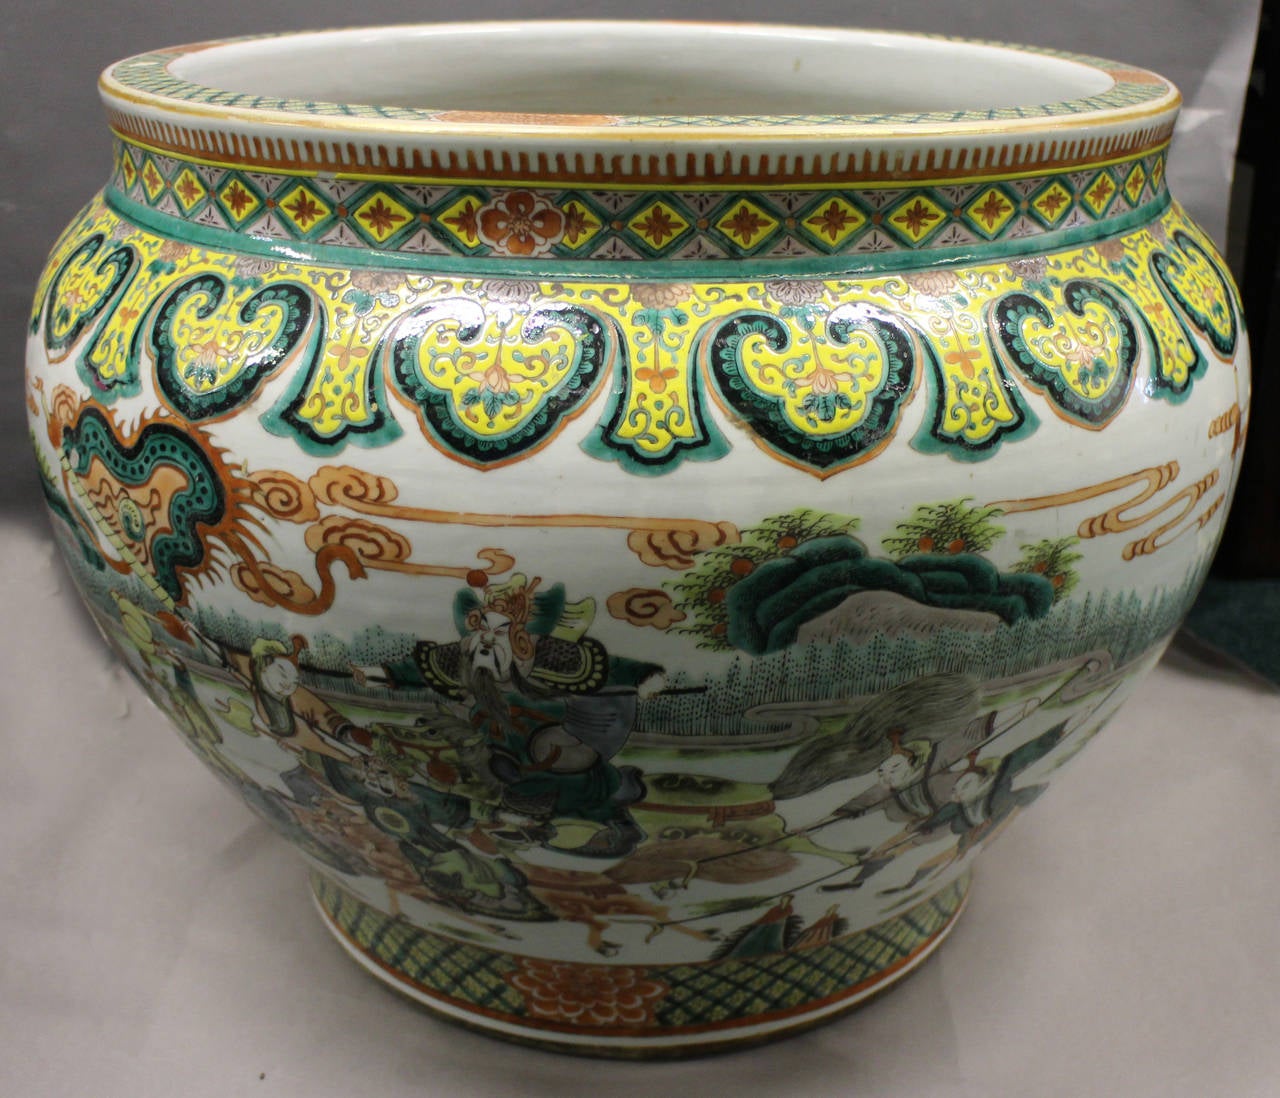 A large Chinese famille vetre fish bowl decorated with a geometric patterned border and a large wraparound scene of warriors on horseback, large goldfish swimming through weeds decorate the inside.

(Buyers in the UK and Europe will be subject to